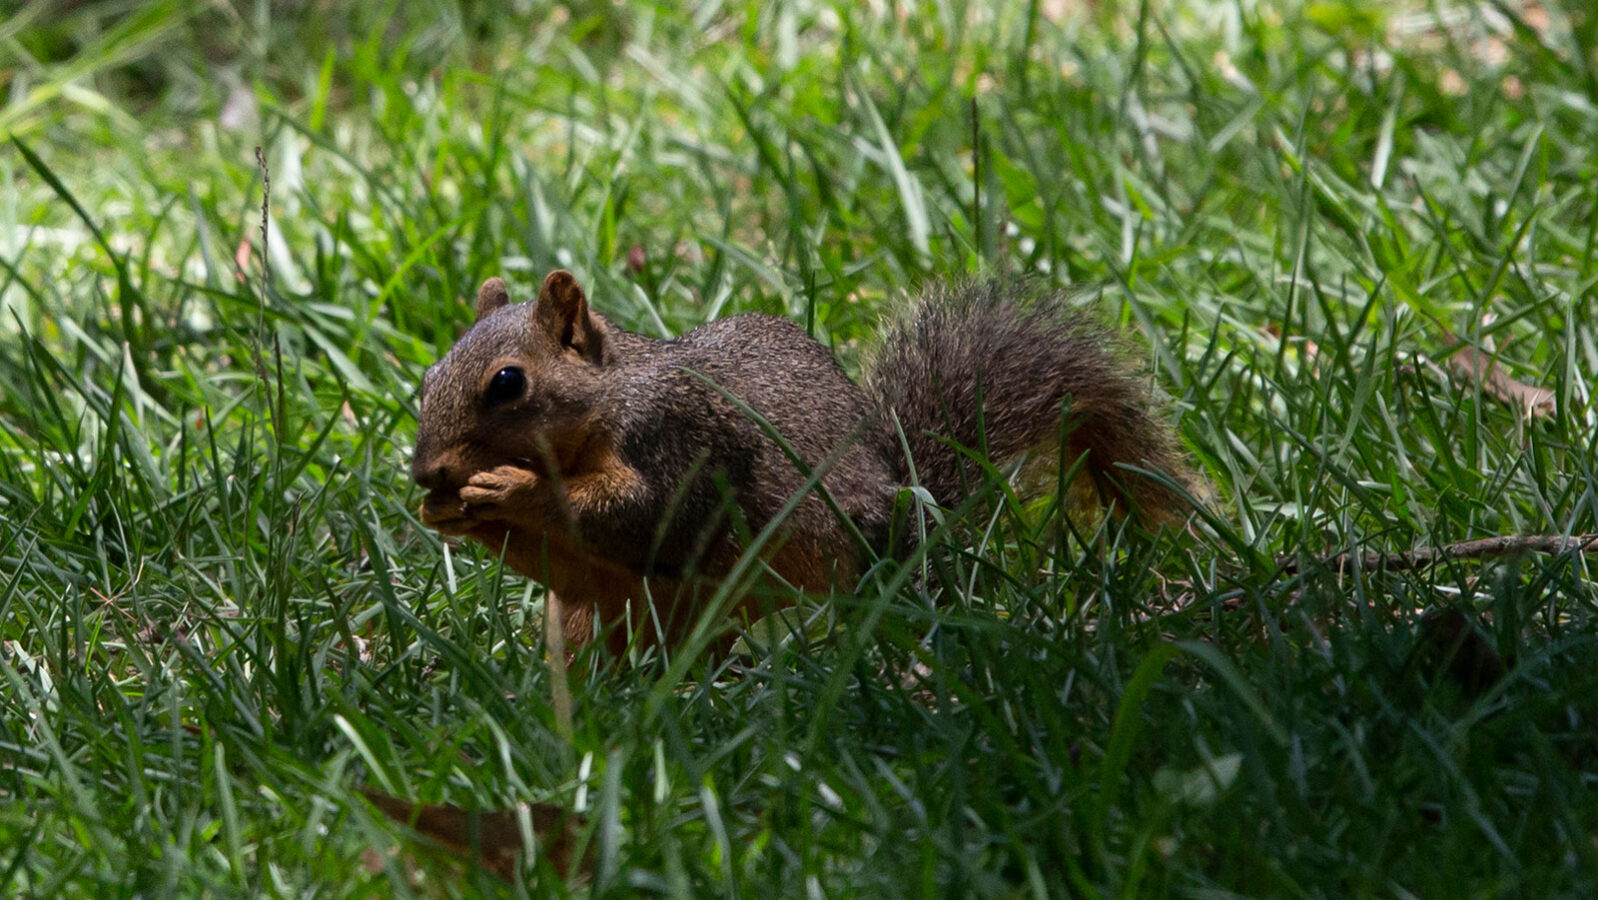 Fox squirrel snacking on a nut in grass